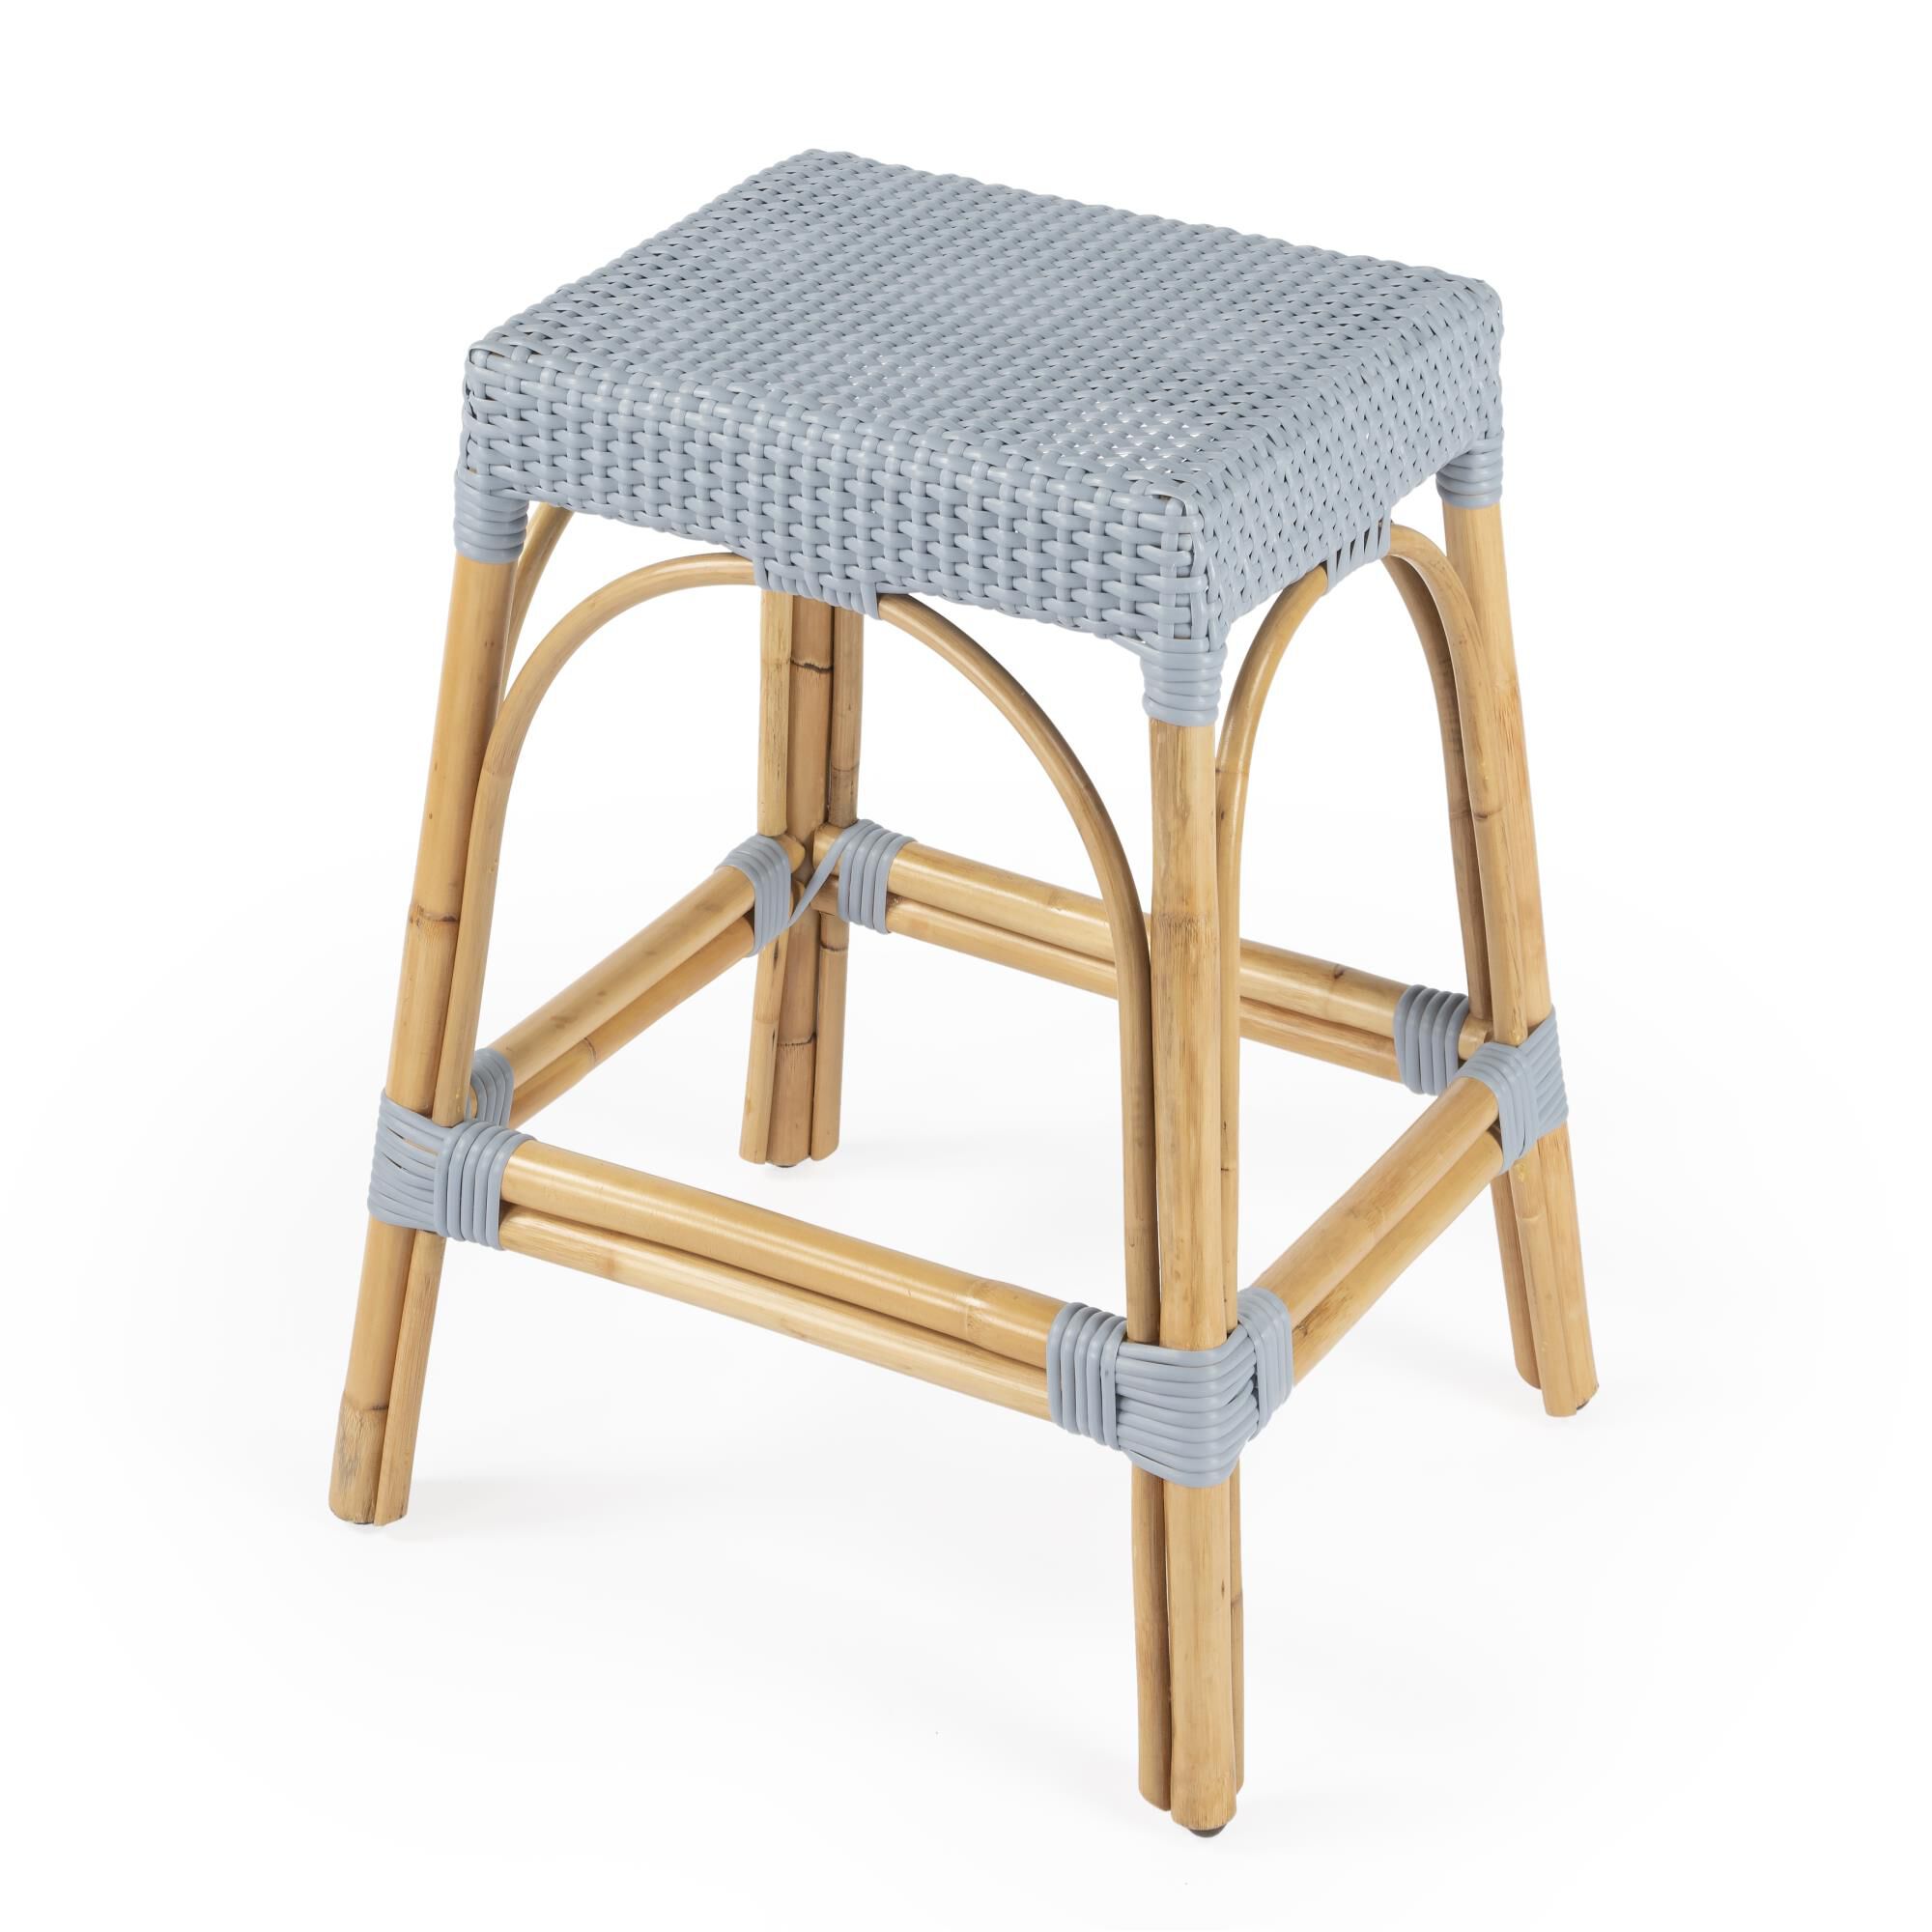 Photos - Chair Butler Specialty Company Robias Stool Robias - 5513341 - Transitional 5513